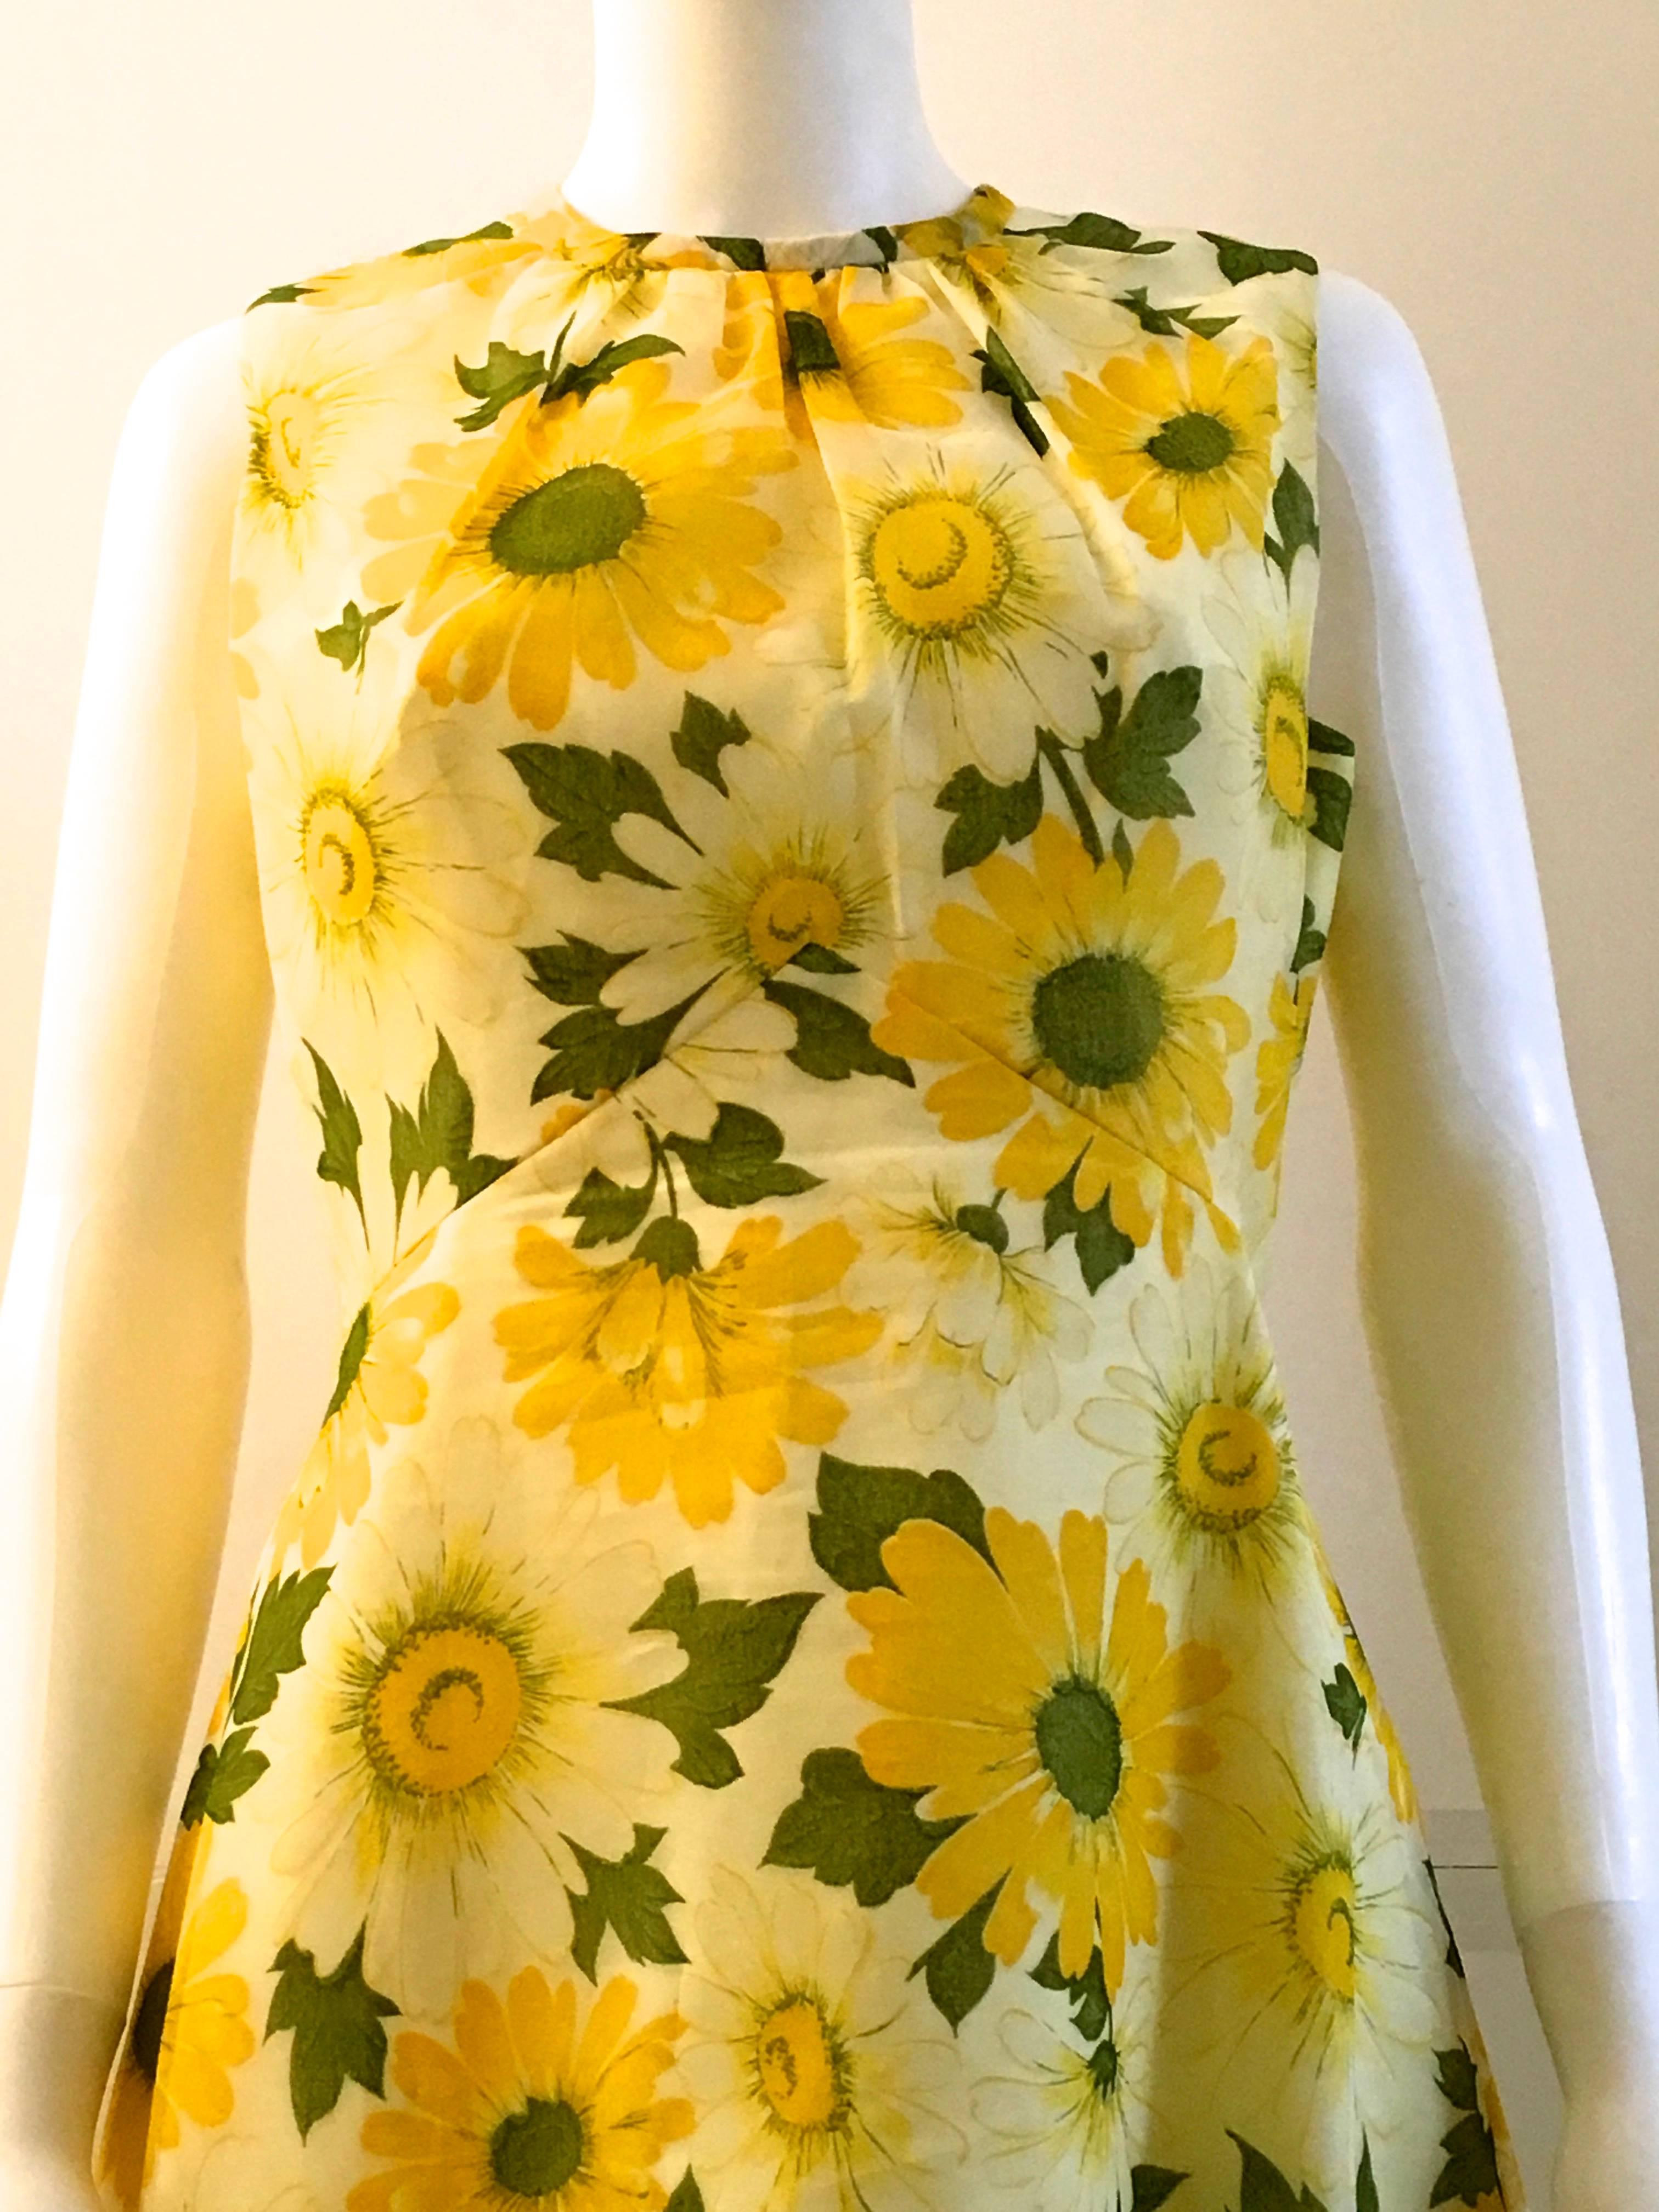 Presented here is a fabulous vintage two piece floral print set. This gorgeous dress and coat combination are both made from a lovely yellow flowered print fabric. The dress is from the 1970's and is extremely flattering when worn. The dress